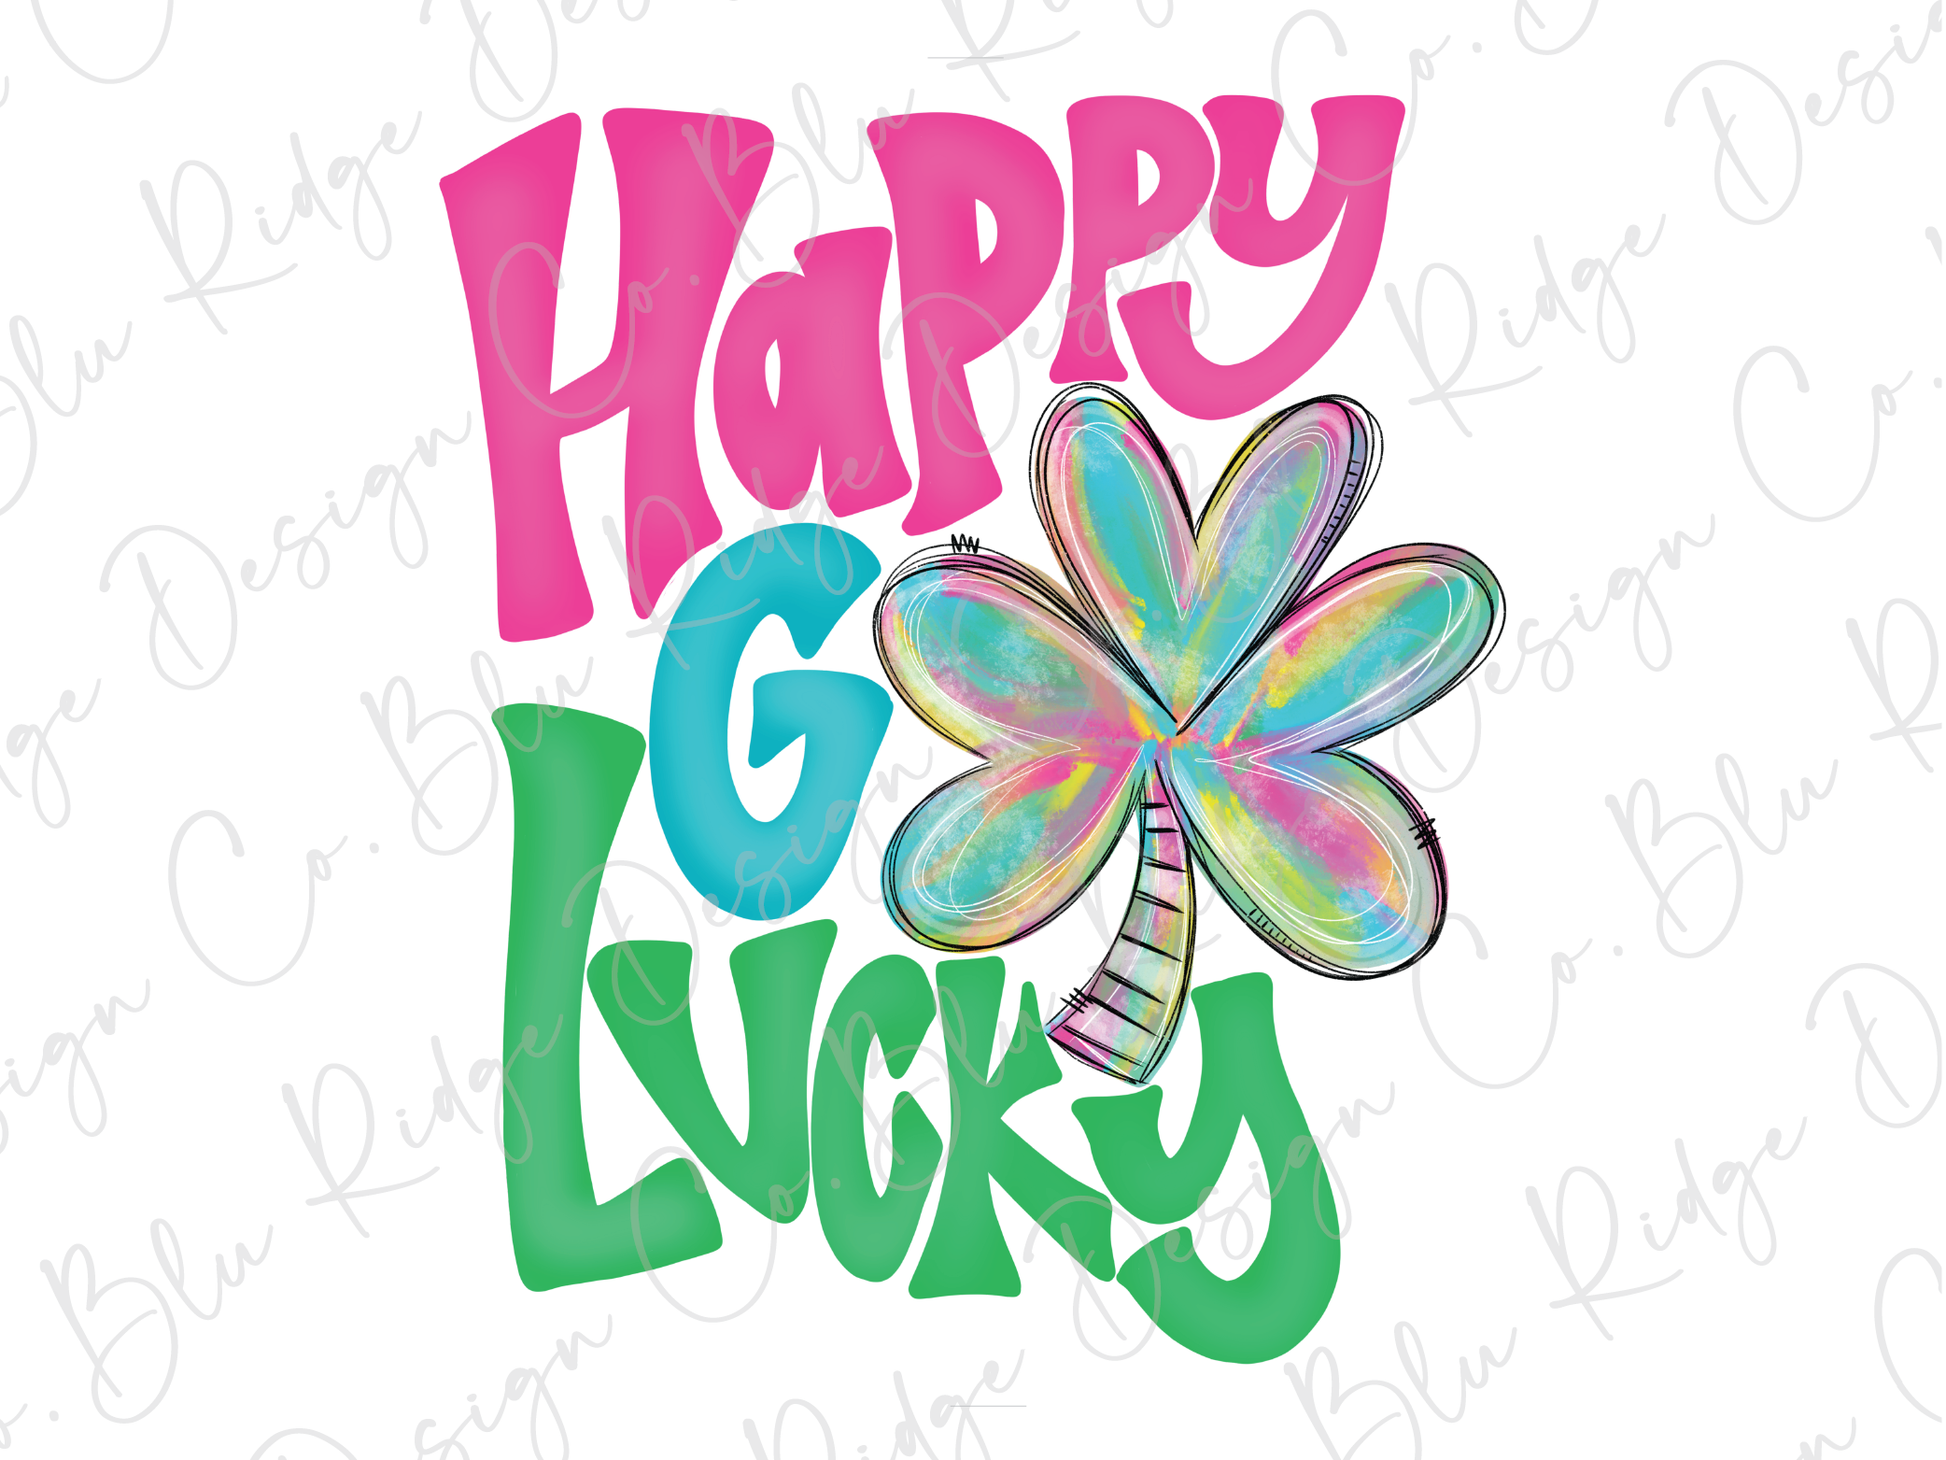 a happy st patrick's day card with a clover